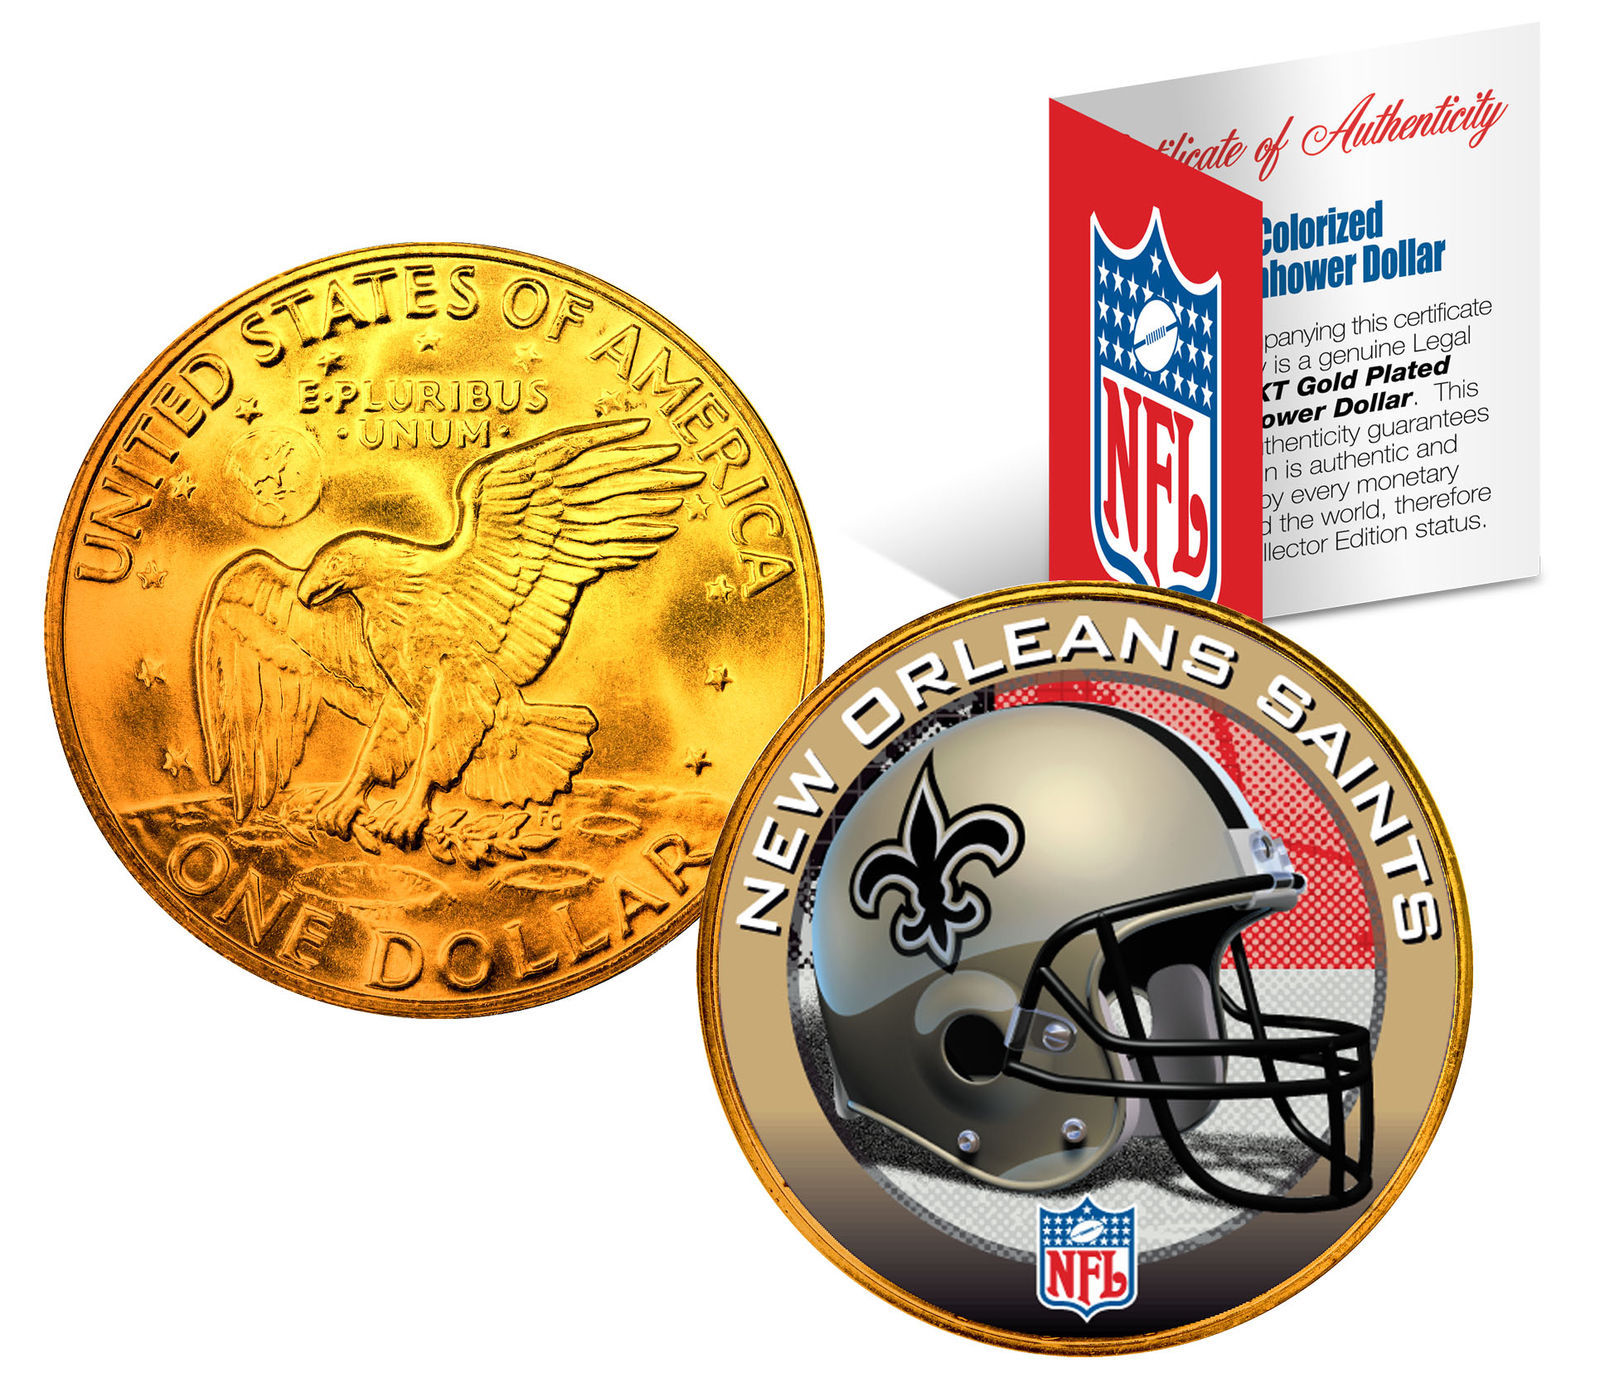 NEW ORLEANS SAINTS NFL 24K Gold Plated IKE Dollar US Coin *OFFICIALLY LICENSED* - $9.46